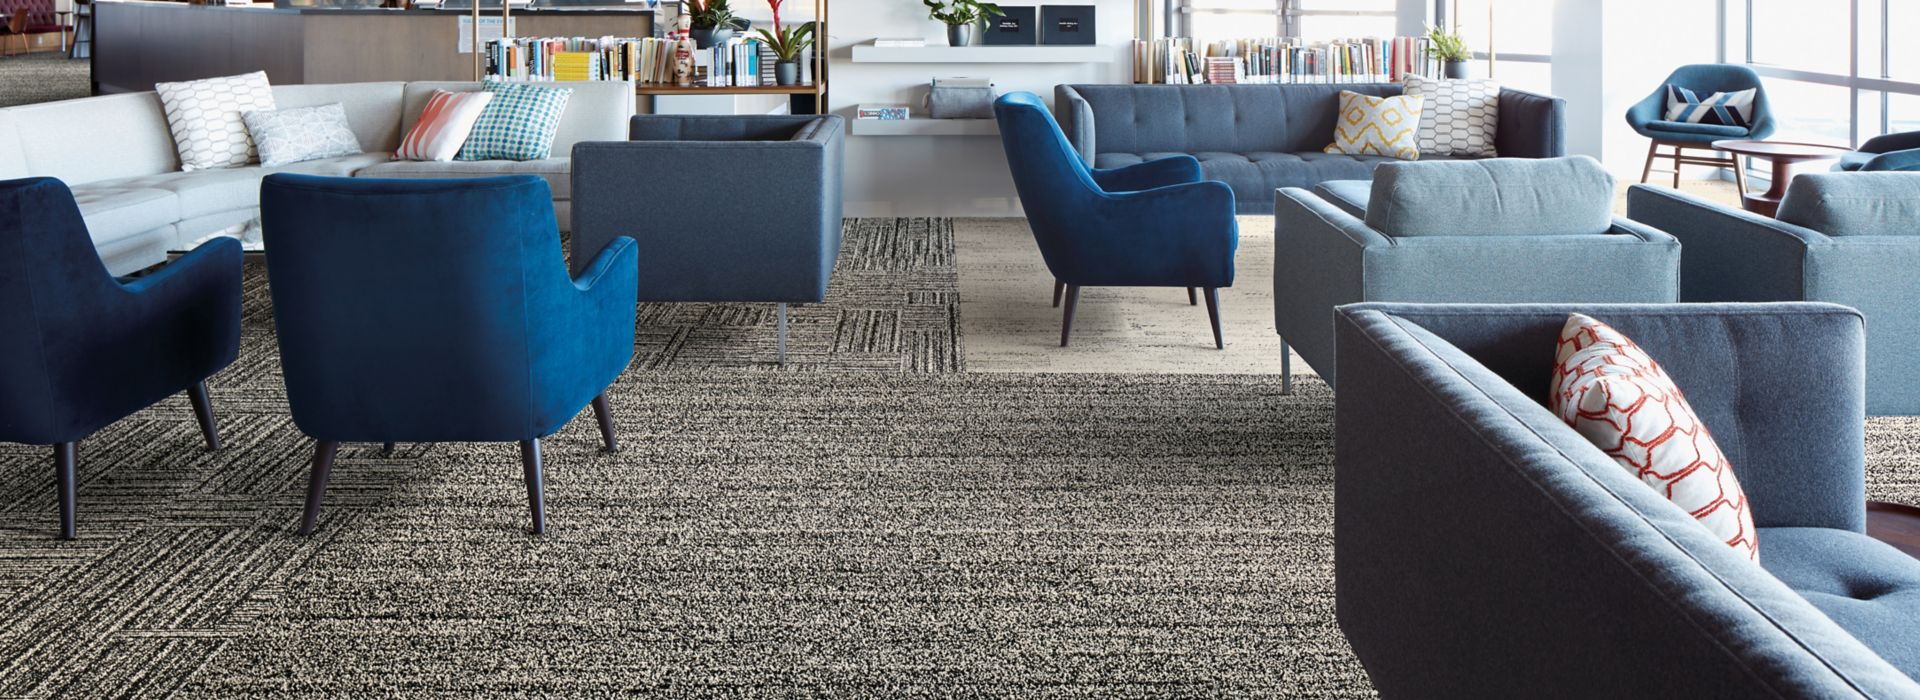 Interface Overedge plank carpet tile in open lounge area with chairs and couches afbeeldingnummer 1